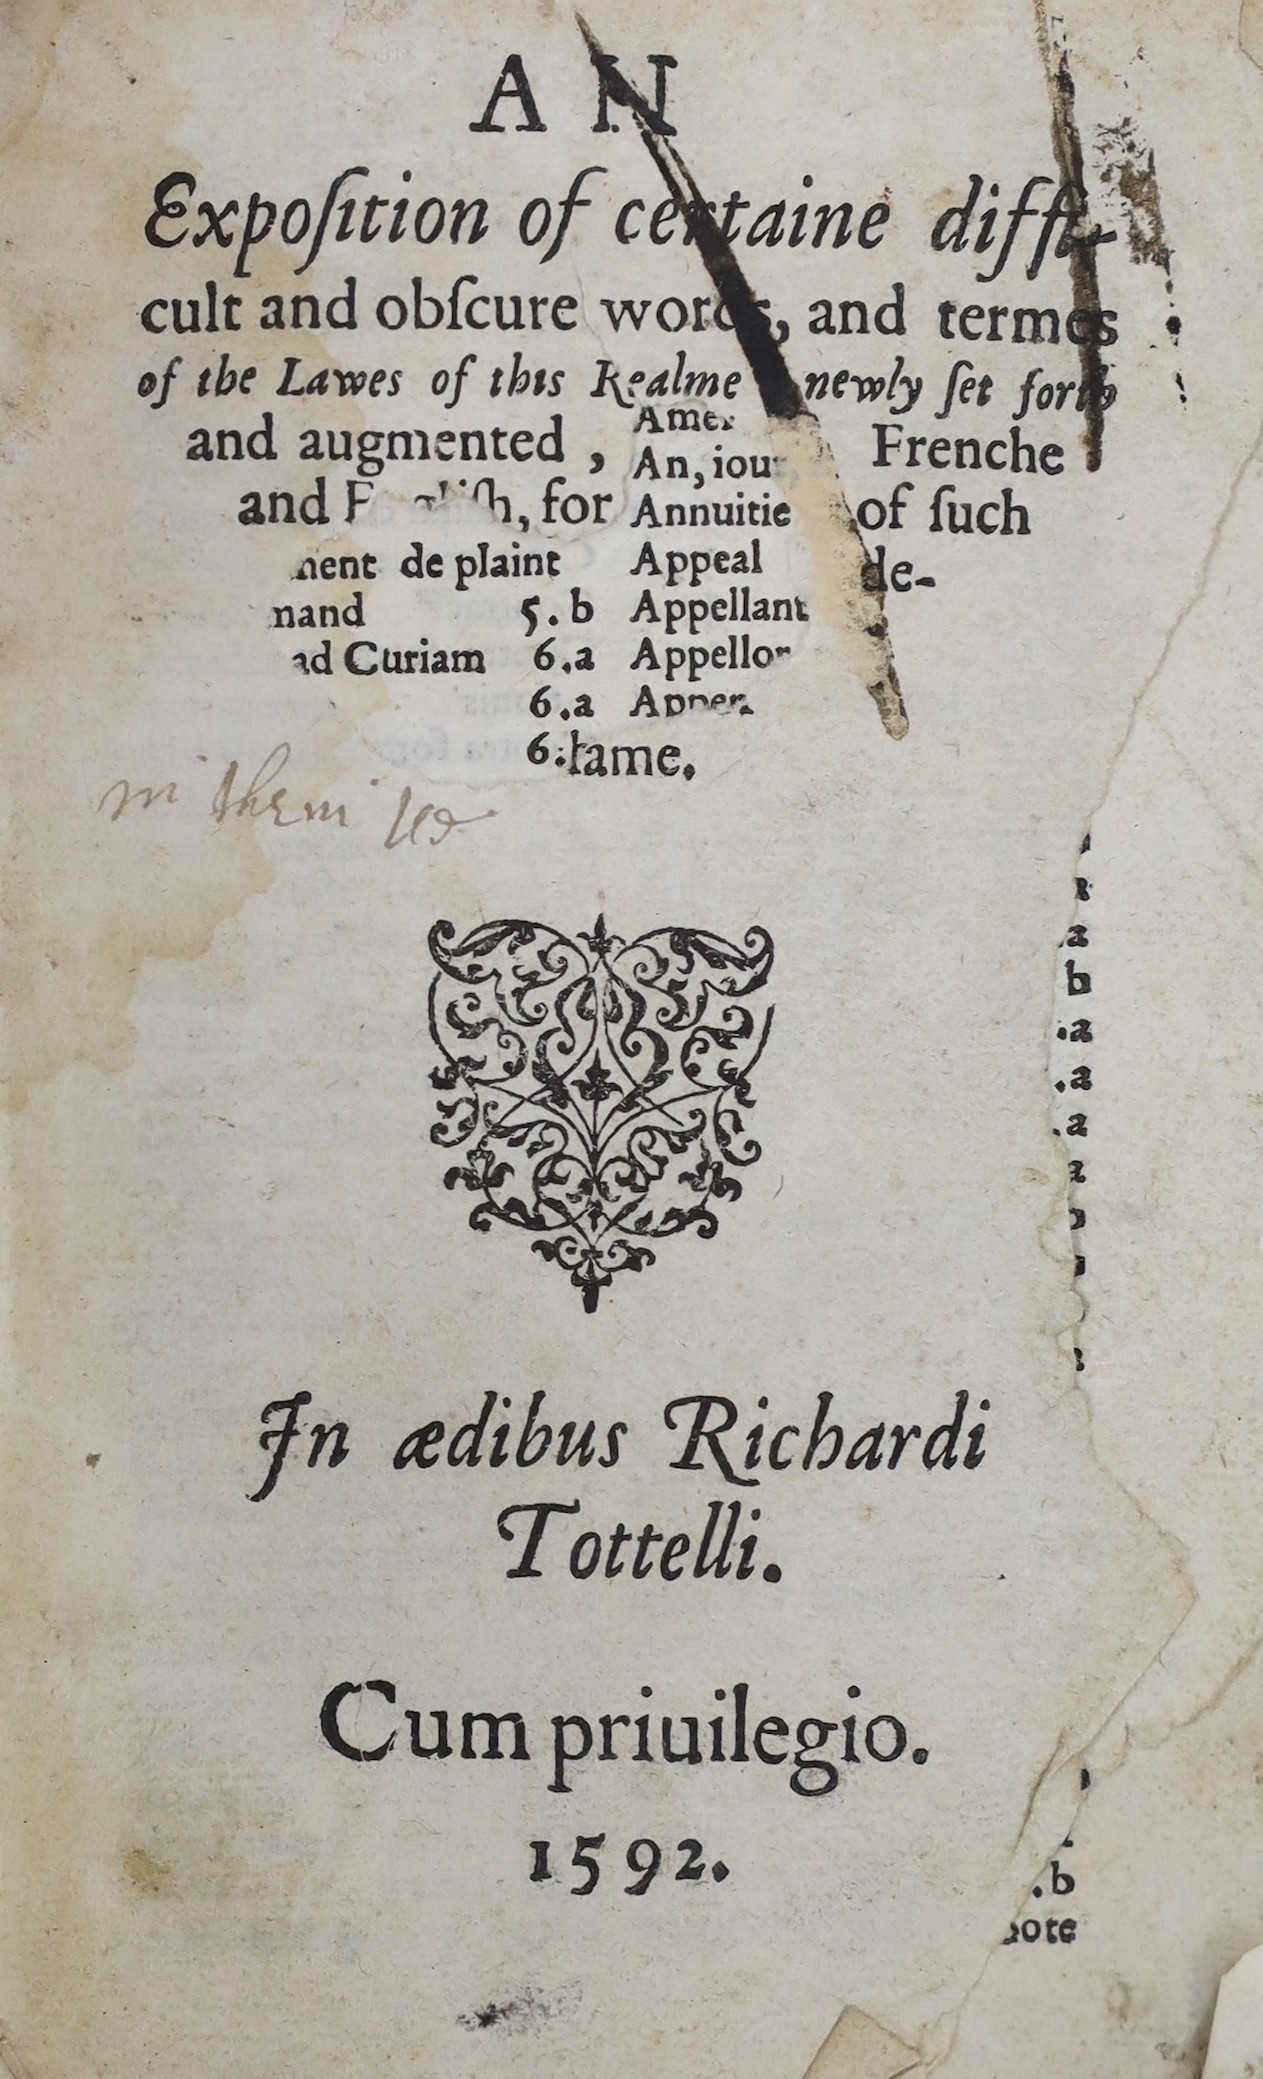 [Rastell, John] An Exposition of Certaine Difficult and Obscure Words, and Termes of the Lawes of this Realme, partly black letter. (4), 196ff; old vellum, ms lettered on spine, sm.8vo. In aedibus Richardi Tottelli ... 1